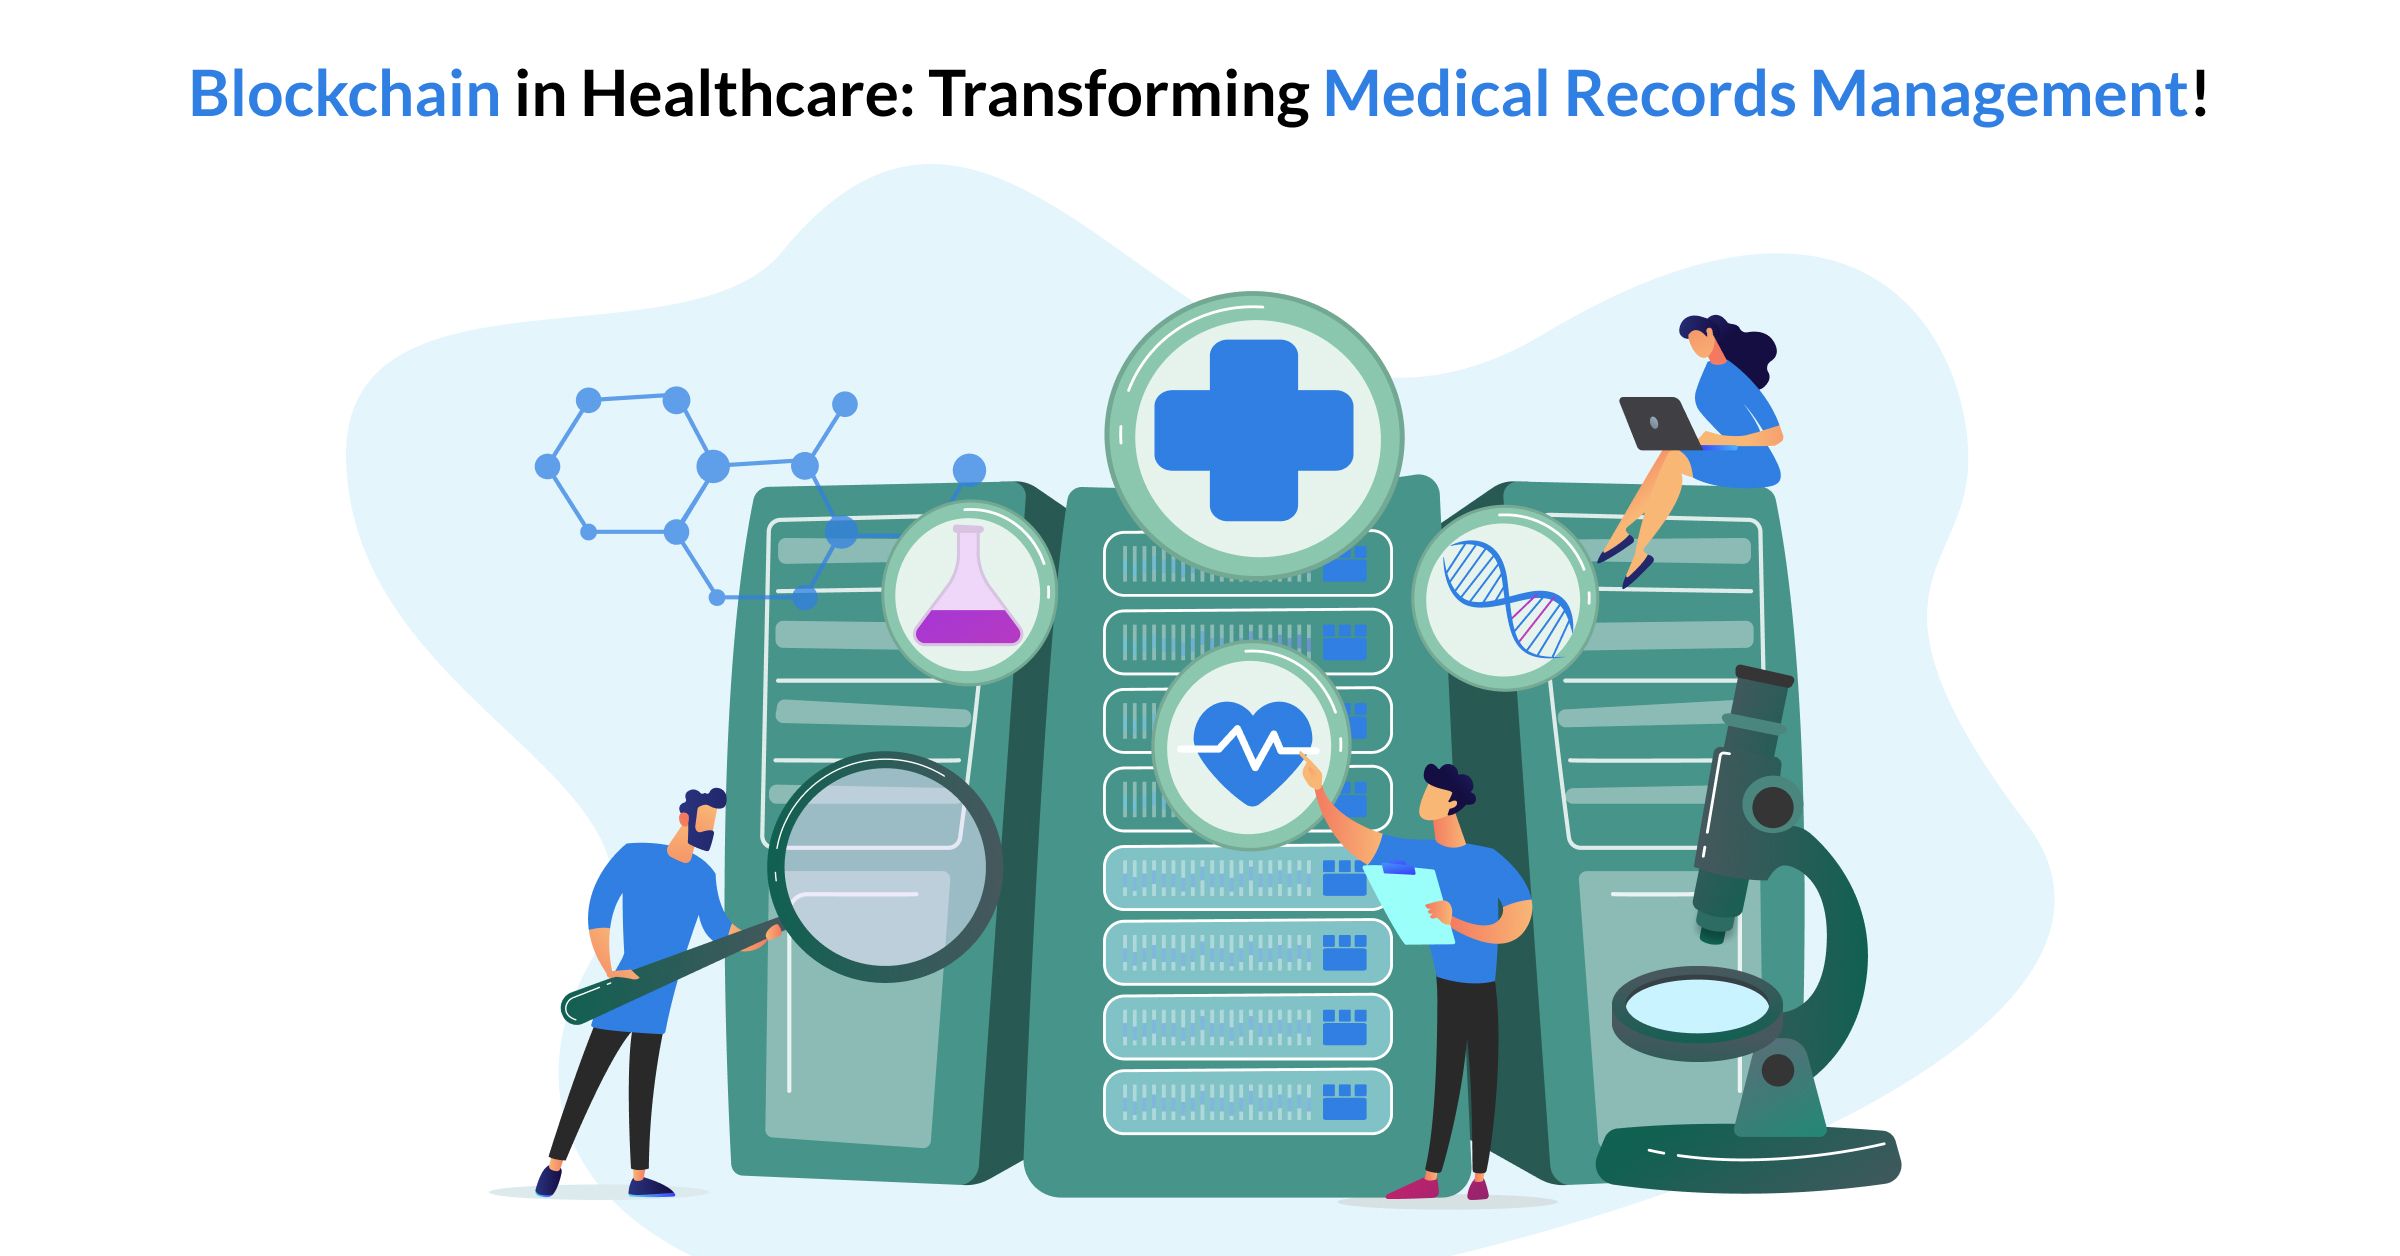 Blockchain in Healthcare: Transforming Medical Records Management!